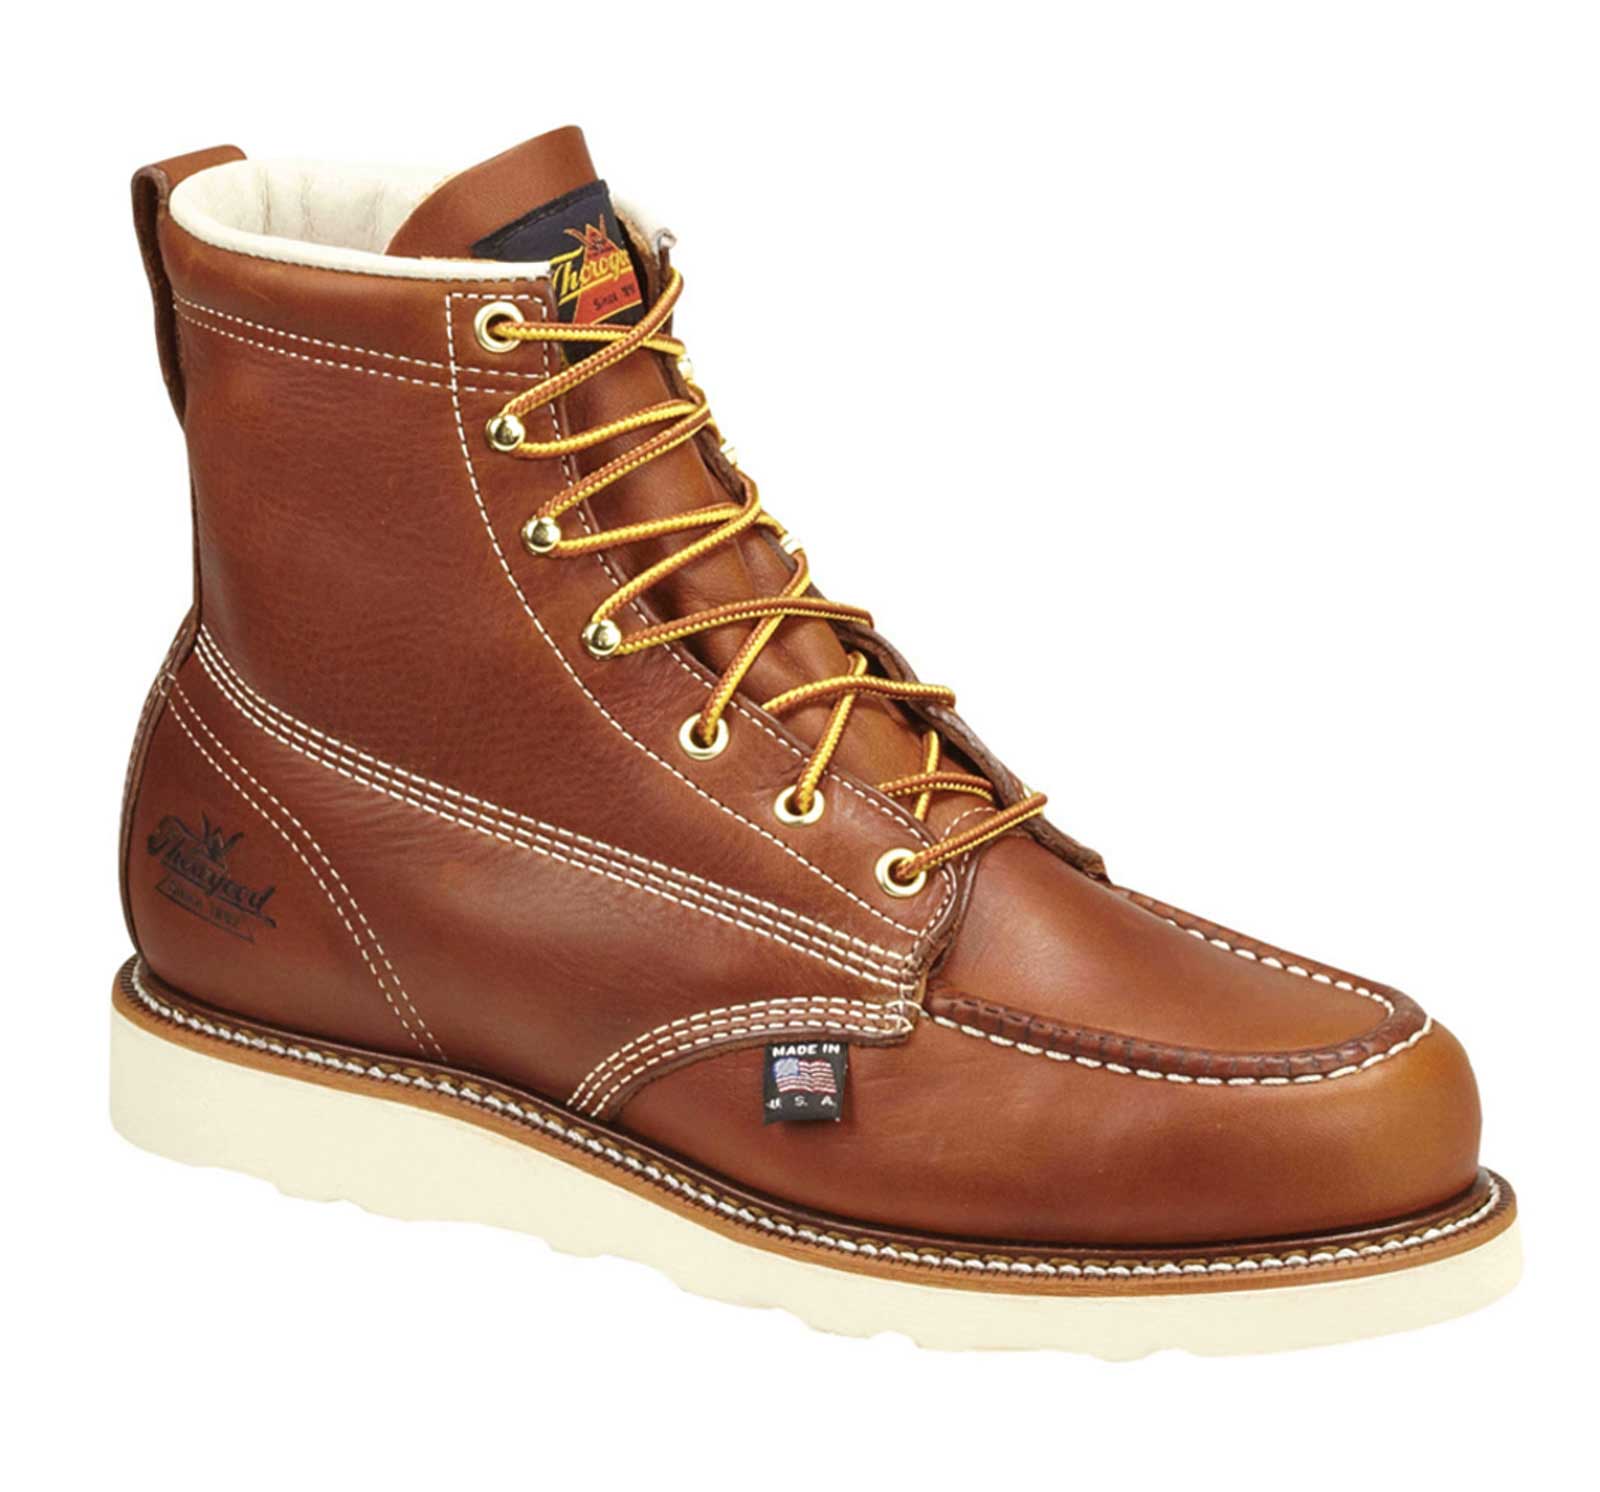 men's 6 thorogood wedge sole boots